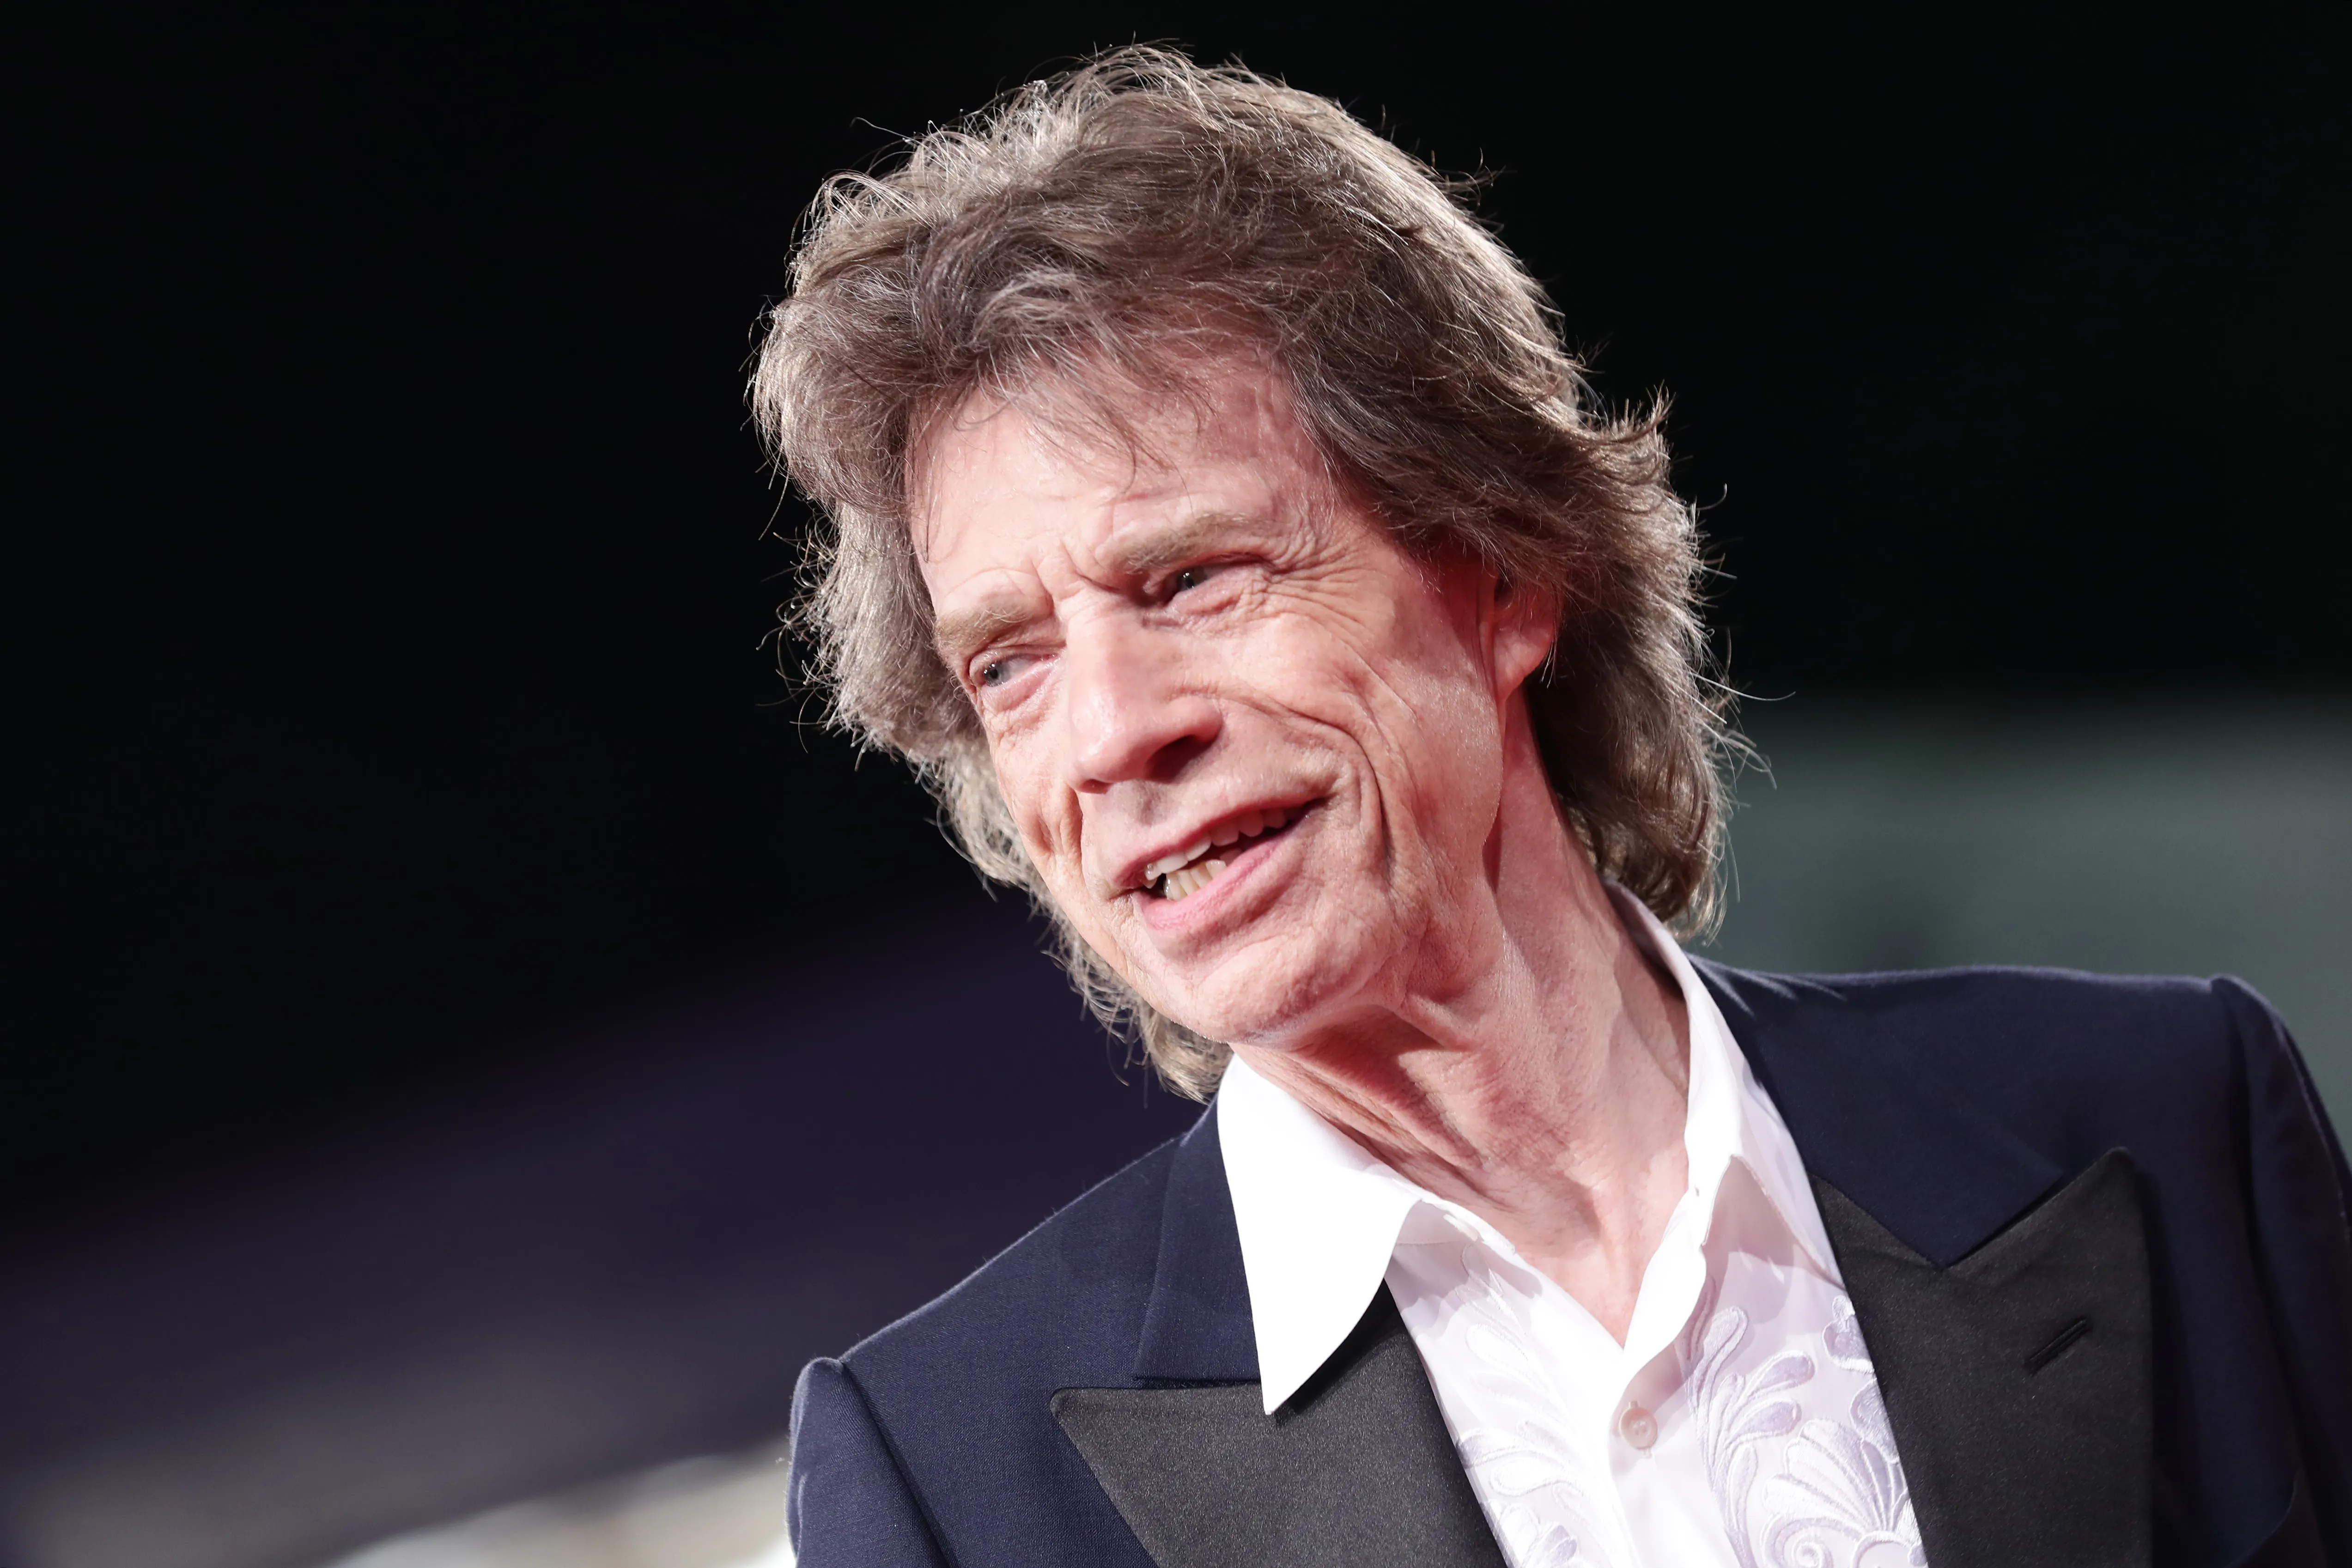 Mick Jagger admits problem with ‘old age,’ ‘mistakes’ he’s made with